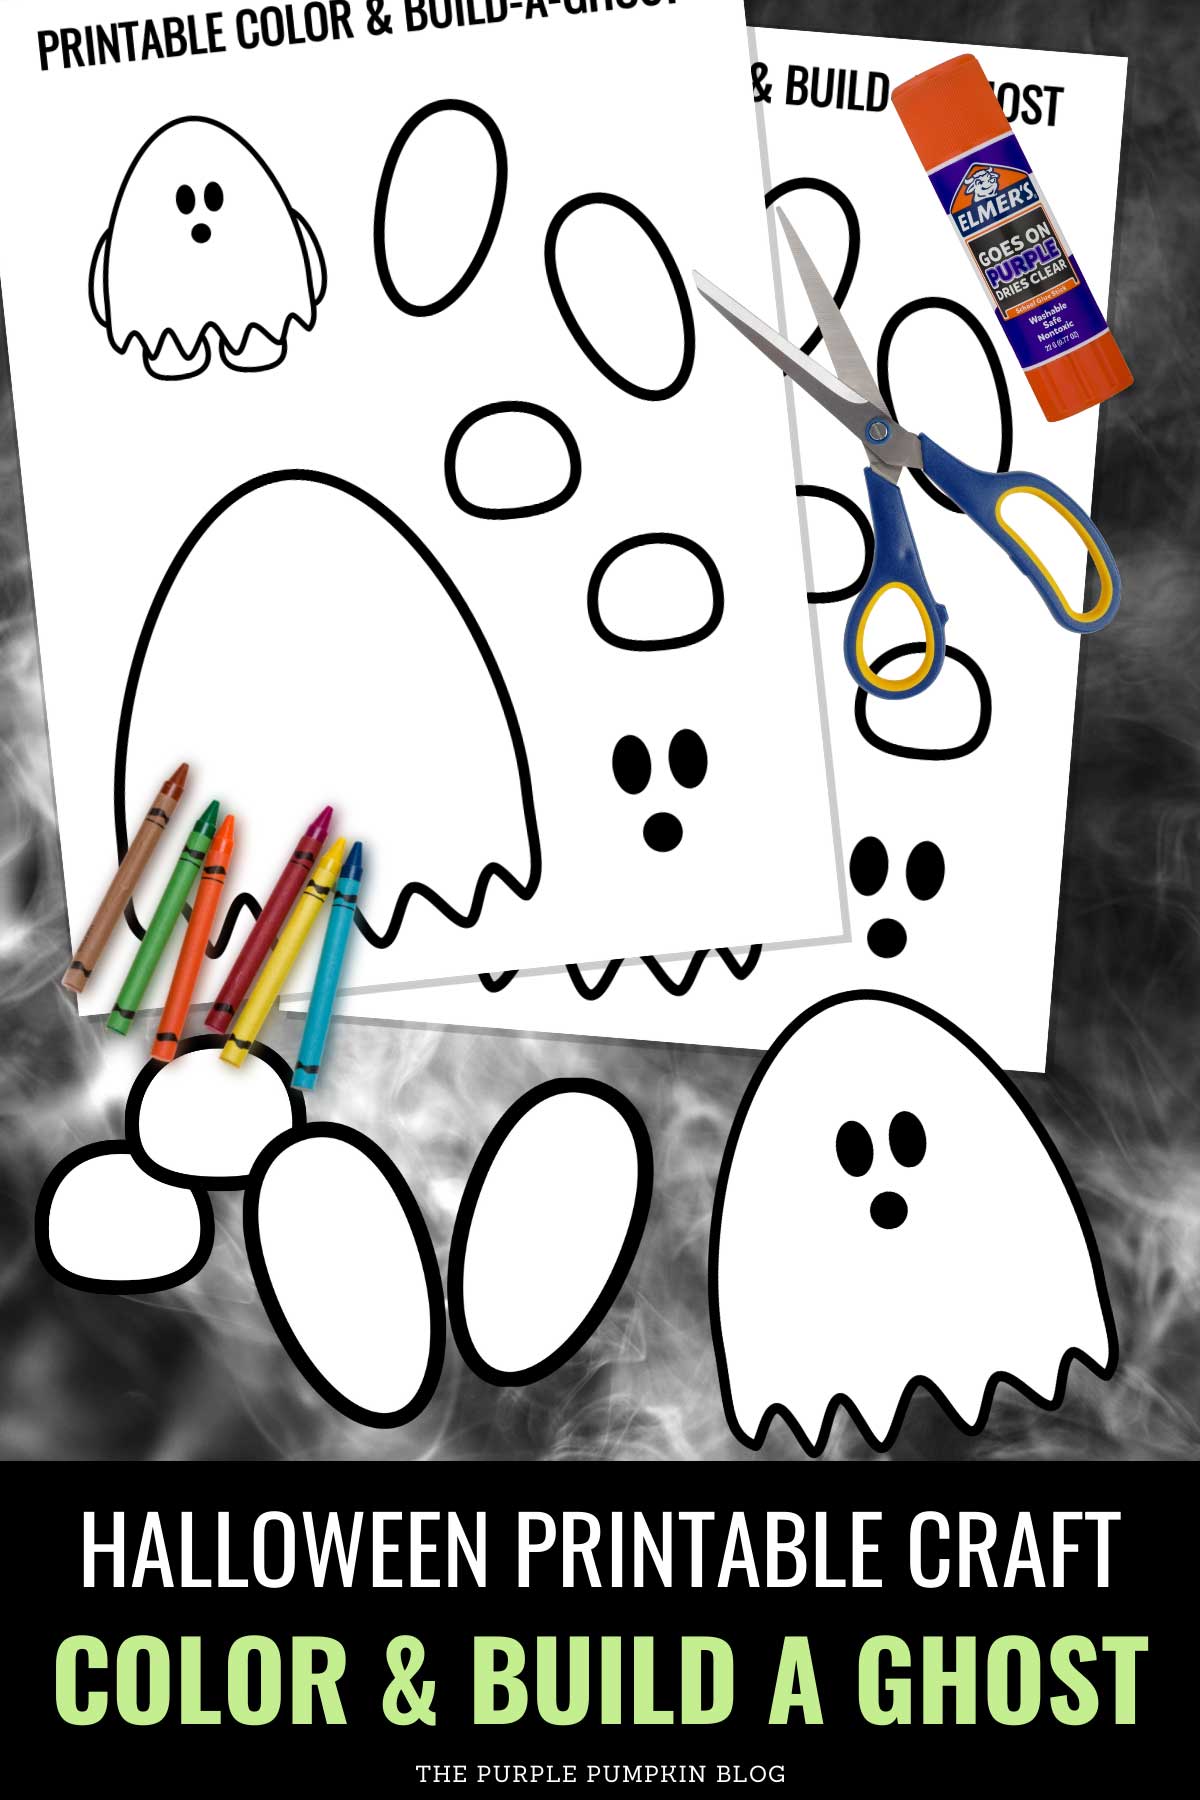 Printable Color & Build A Ghost